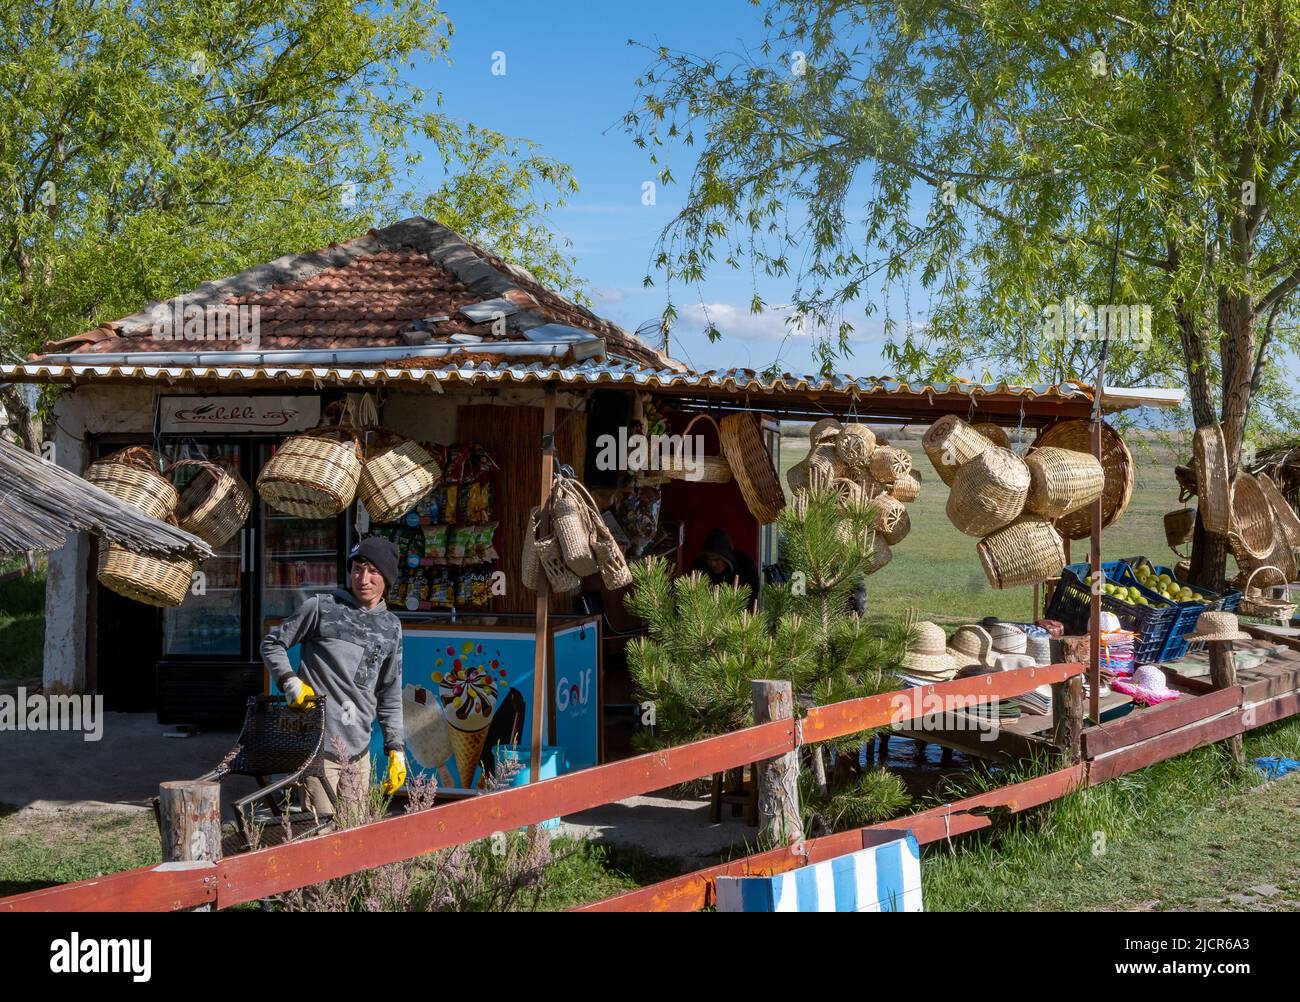 A roadside shop selling hand-made baskets and other things. Türkiye. Stock Photo